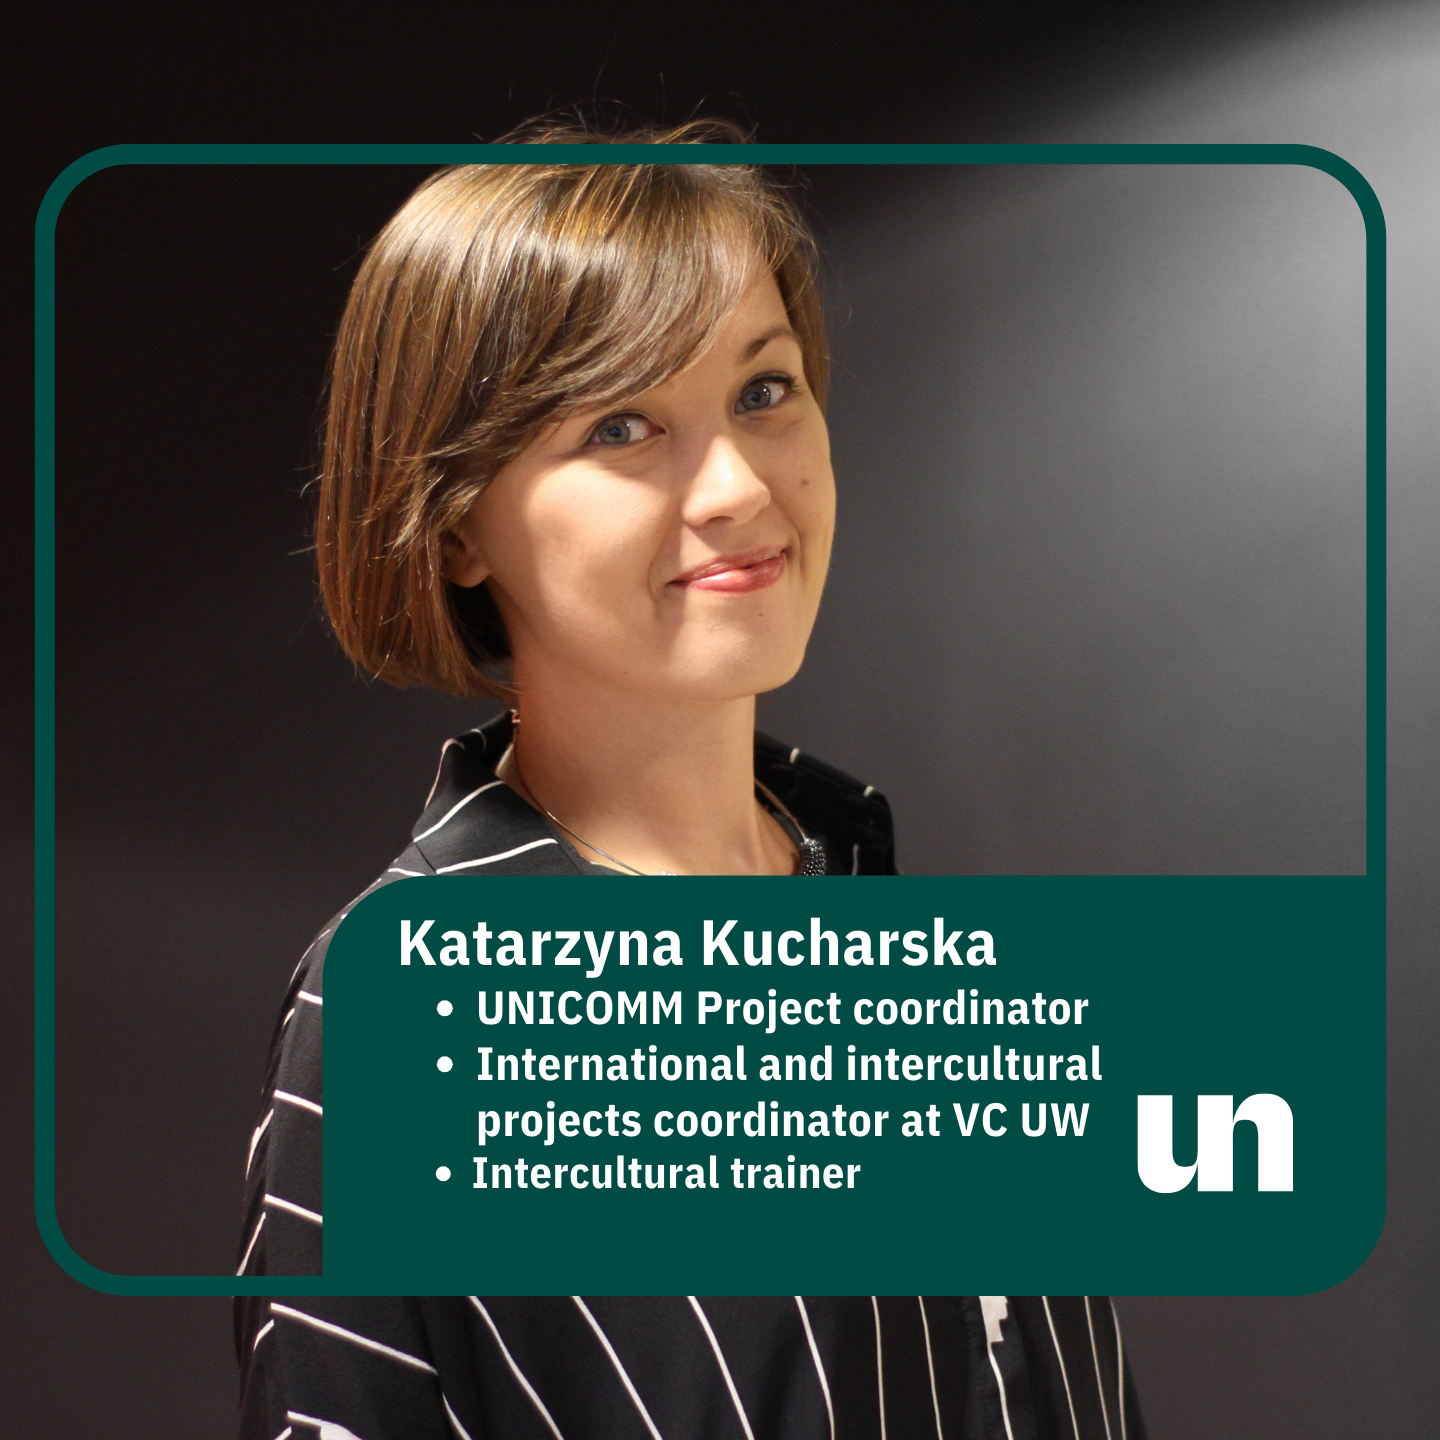 Click and get more info about Katarzyna Kucharska